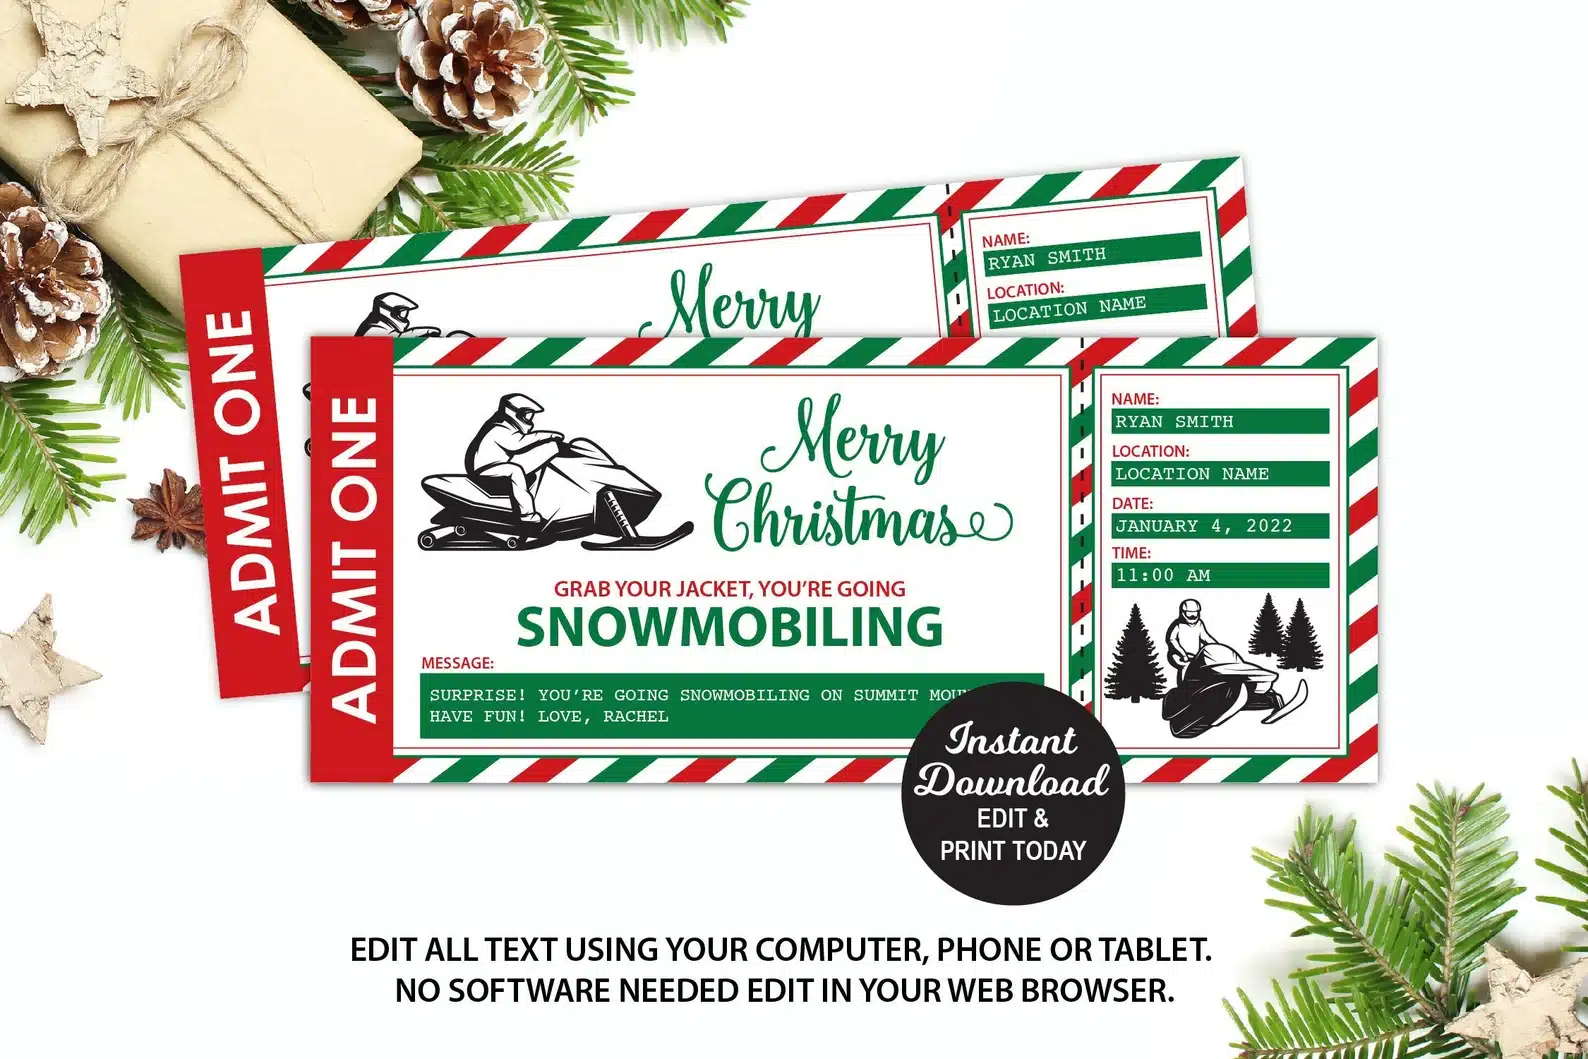 Snowmobile Ticket Gift Card Christmas